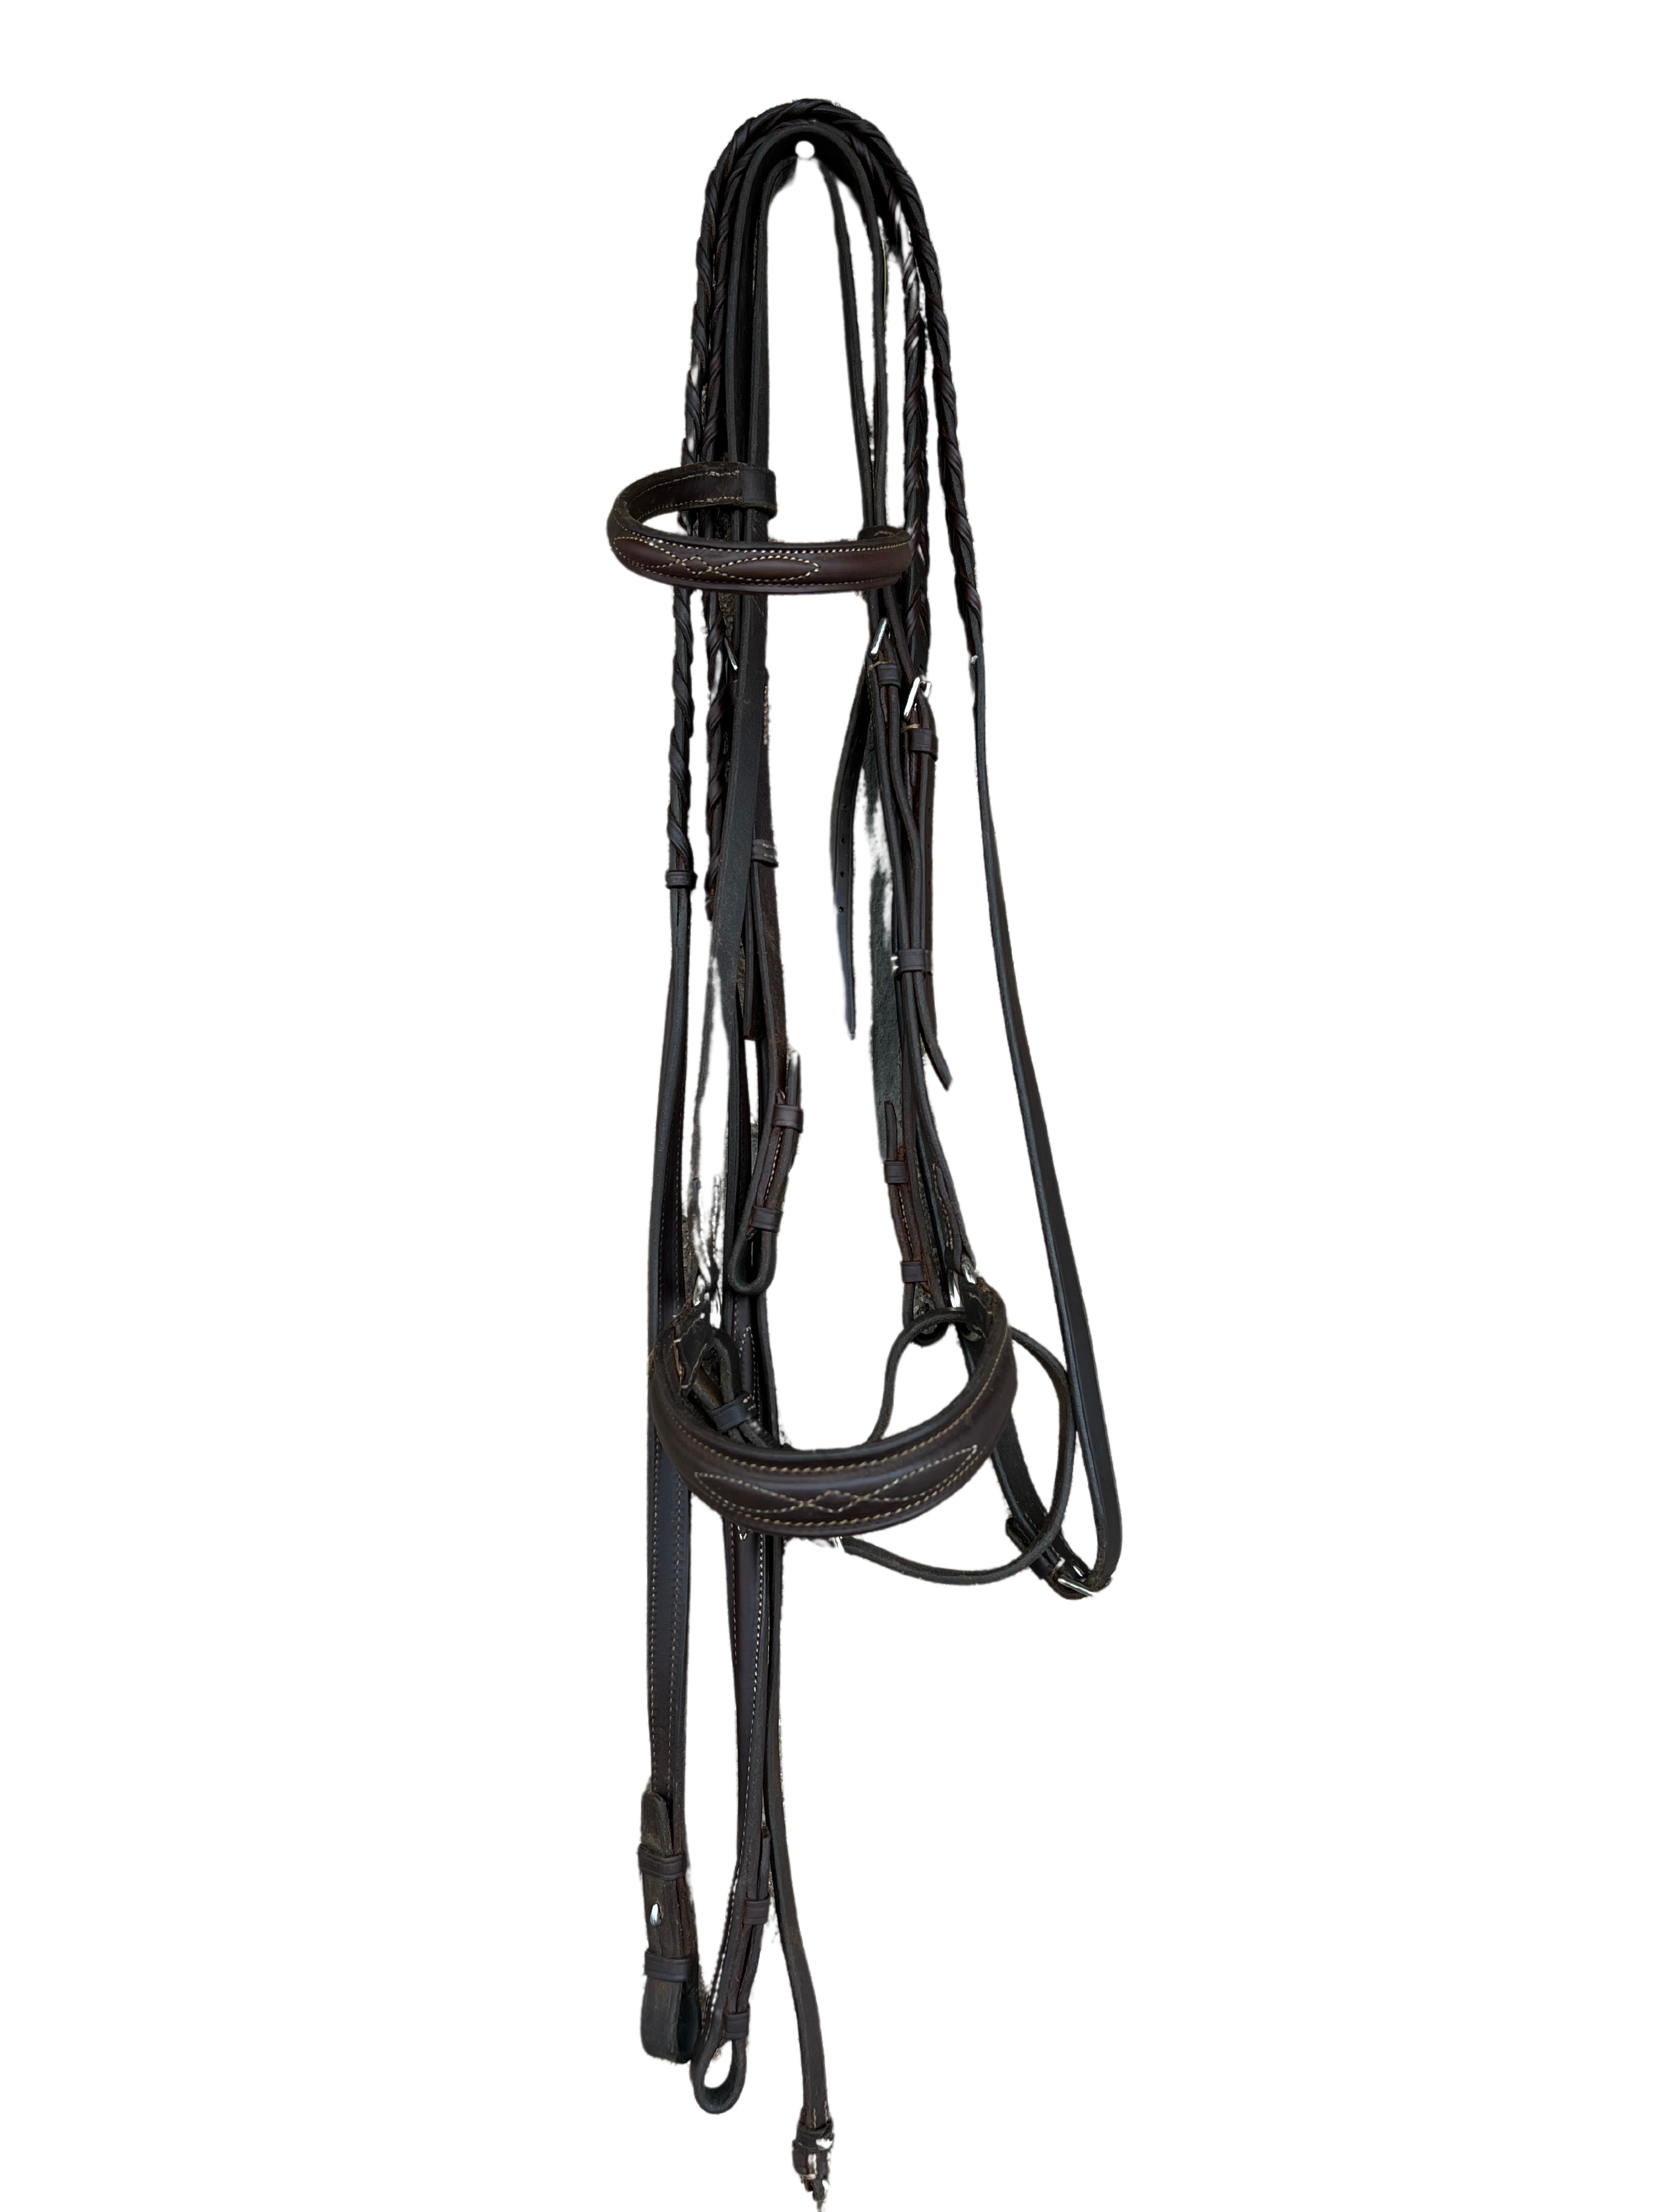 PRE-LOVED EQUUSPORT CRANK CUSTOM BRIDLE WITH REINS